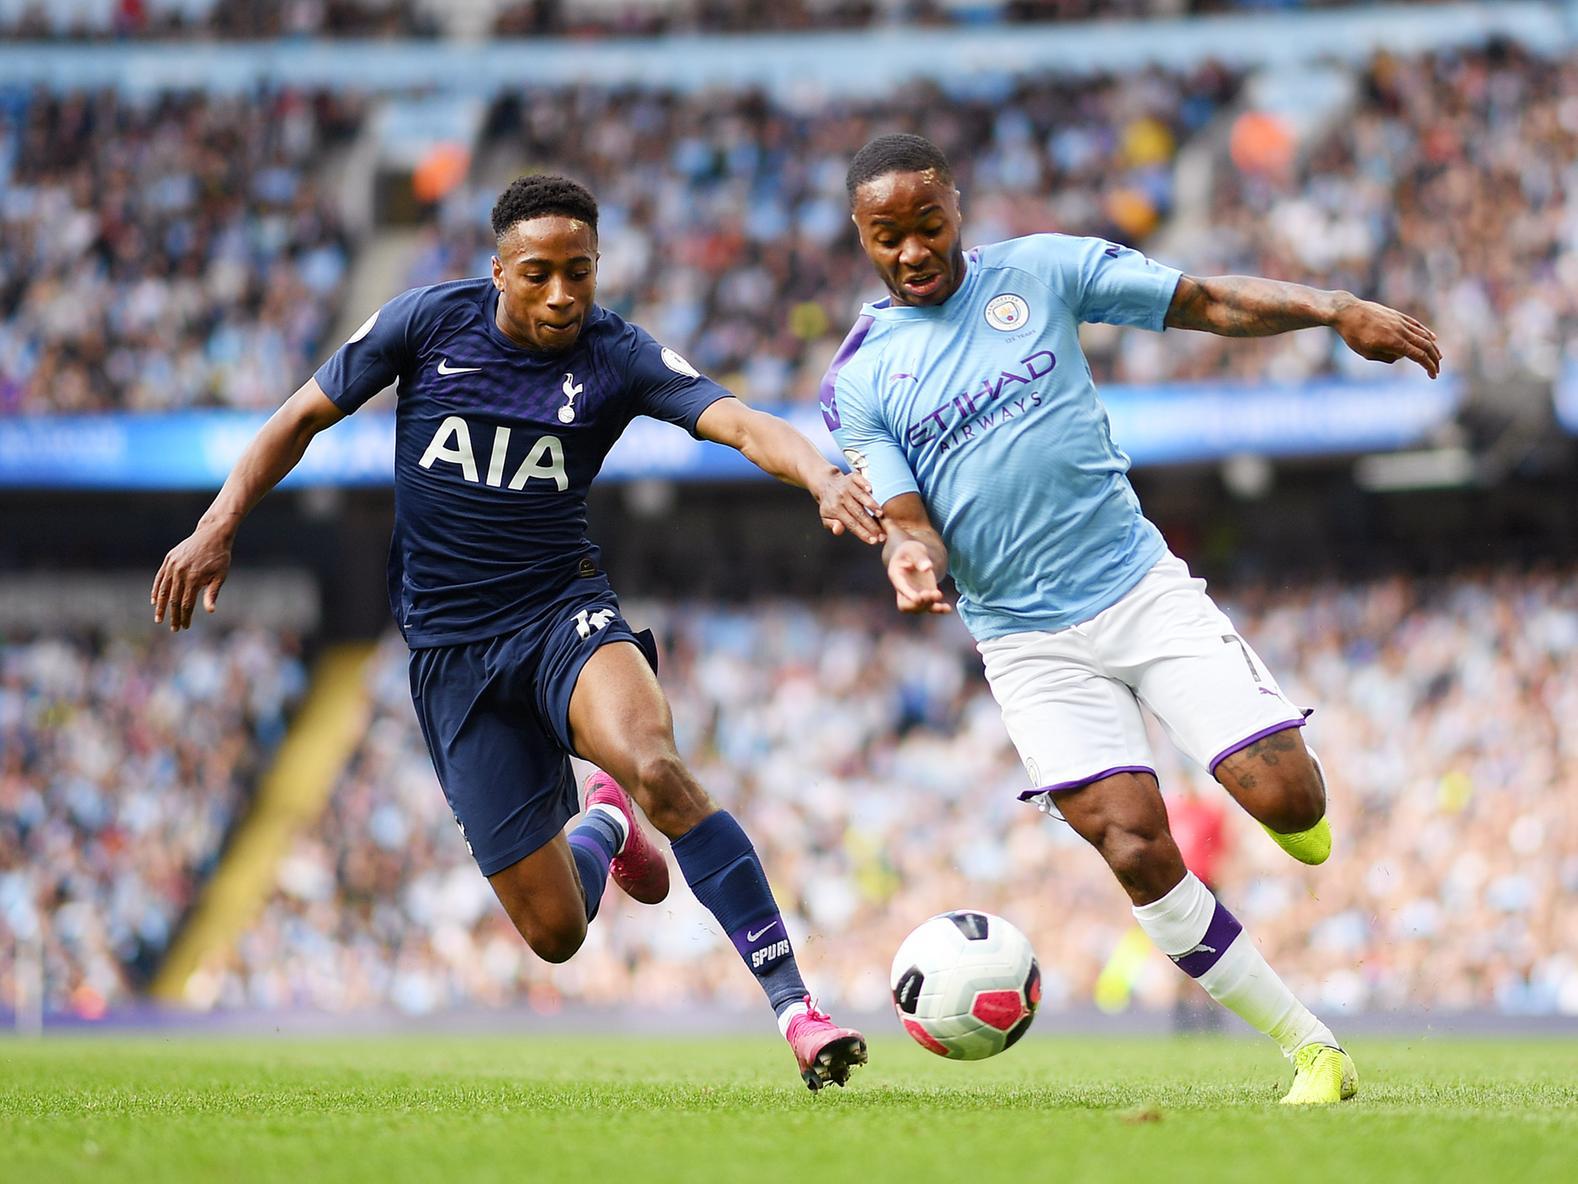 The Saints looked a transformed side following their harrowing 9-0 loss to Leicester City earlier in the season. They're looking to consolidate their push for mid table with the signing of Spurs defender Kyle Walker-Peters on loan.